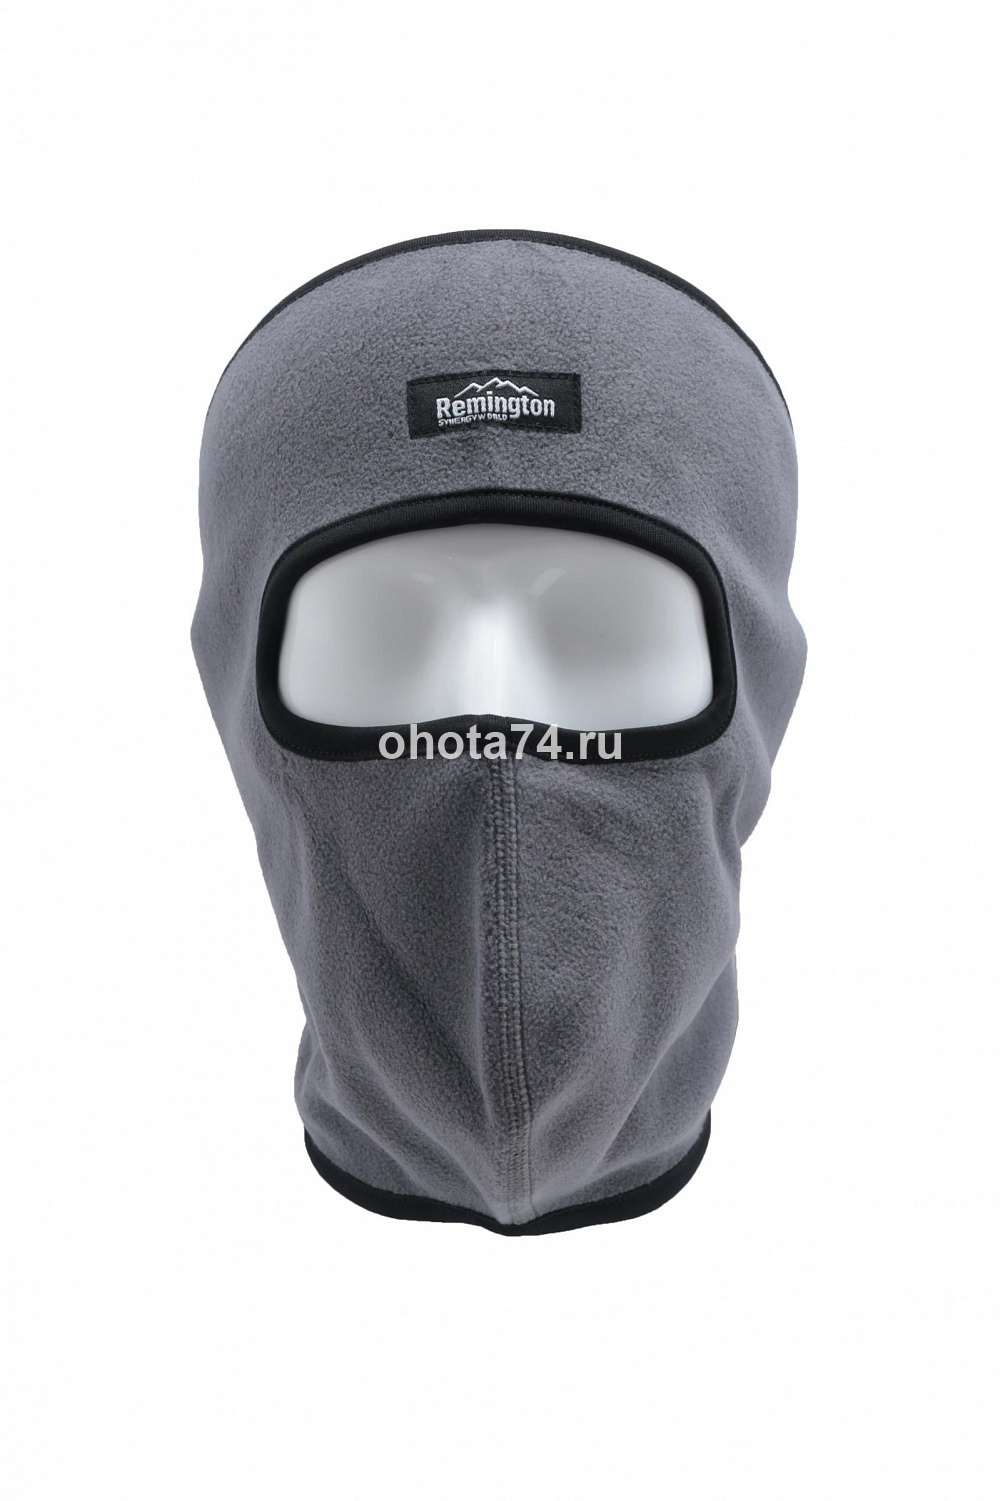   Remington Reliable Protection Against Cold Grey /RUA13-013   " "